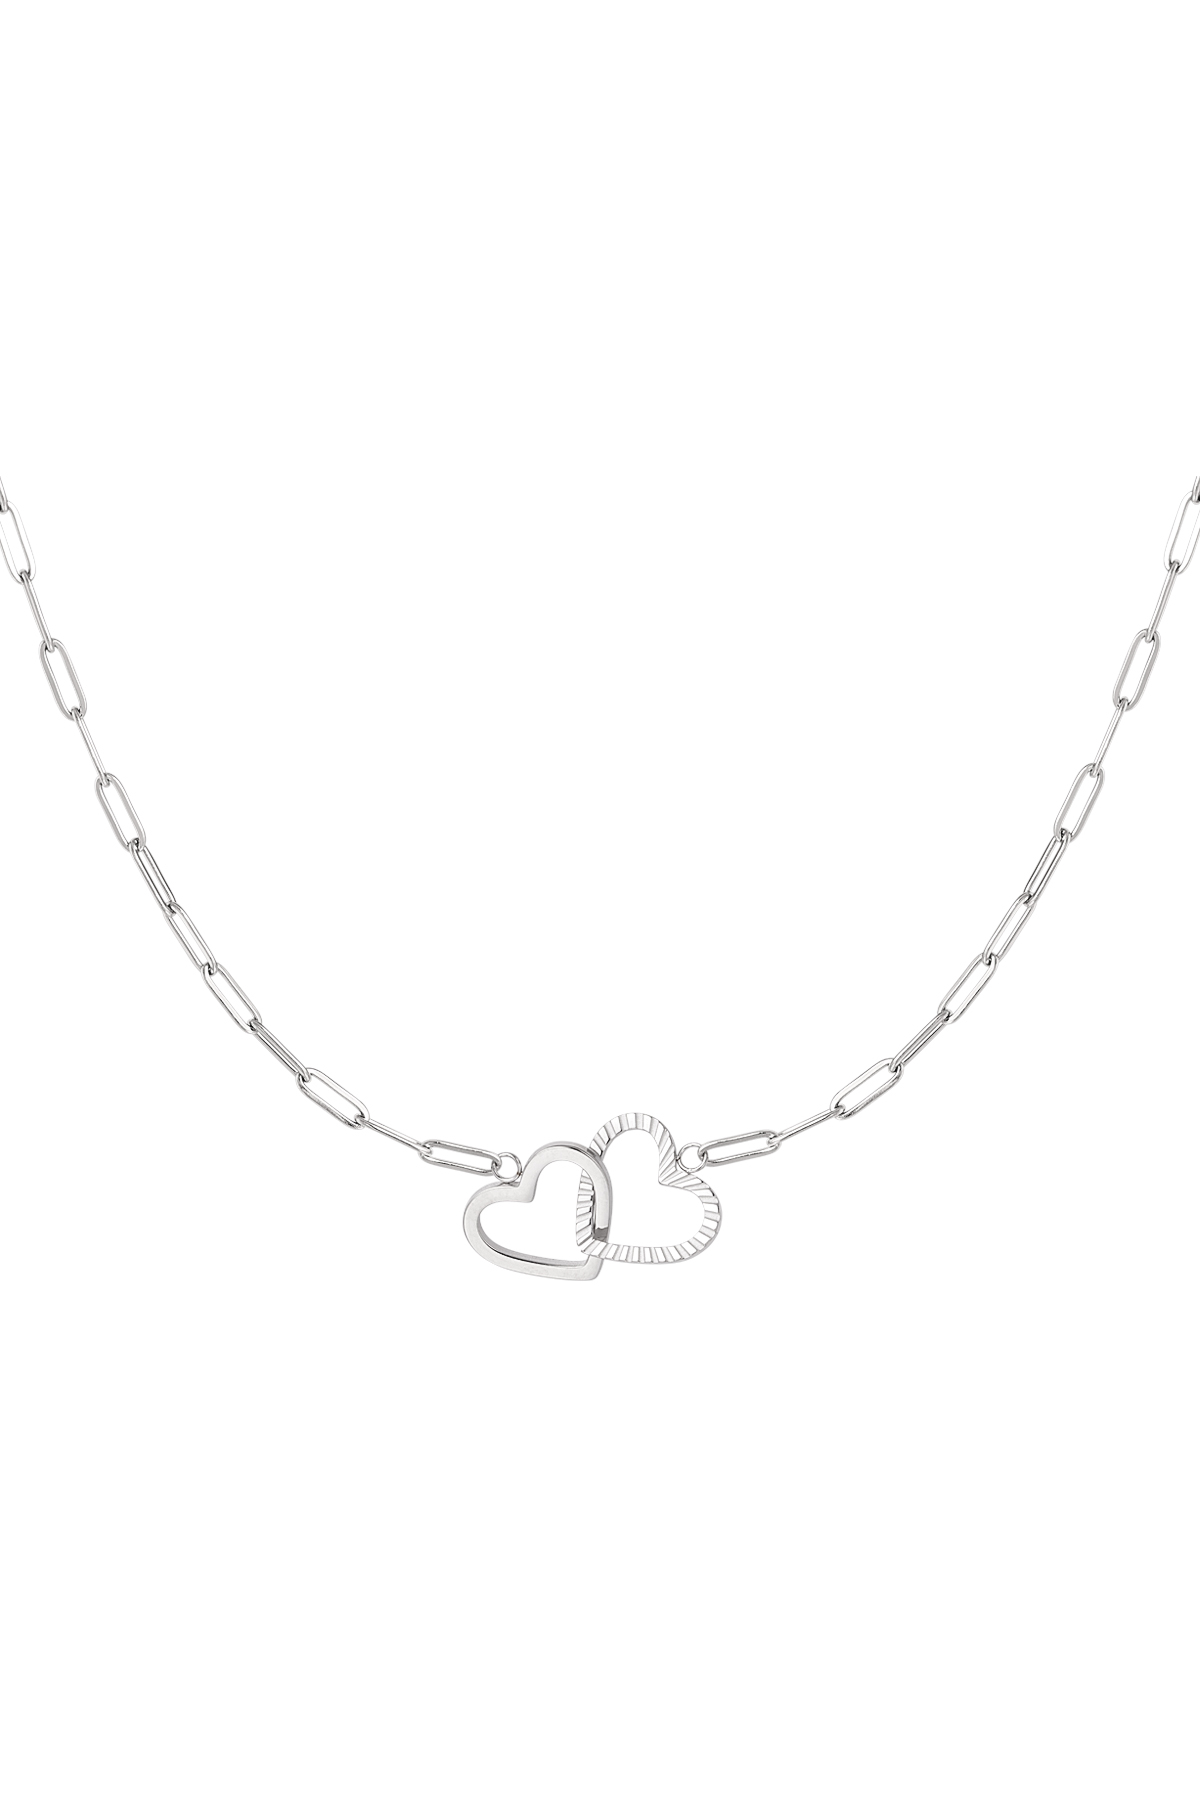 Necklace linked hearts - silver Stainless Steel